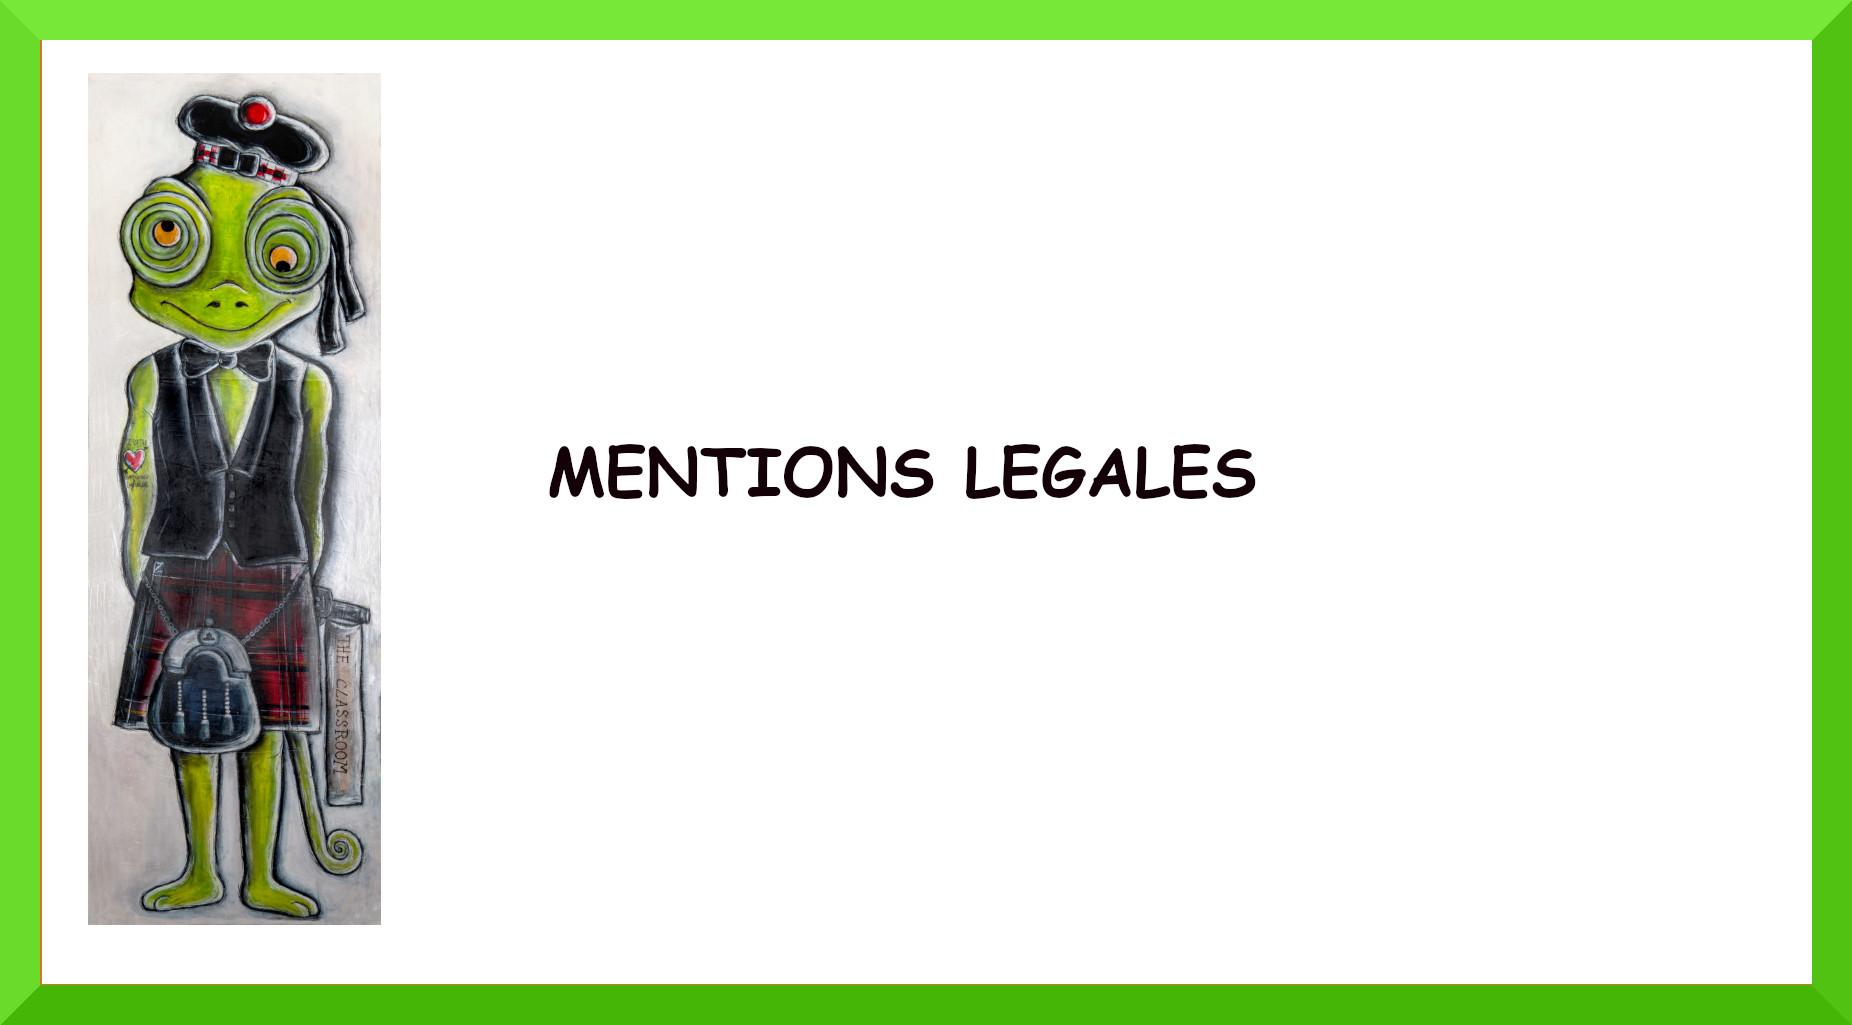 MENTIONS LEGALES